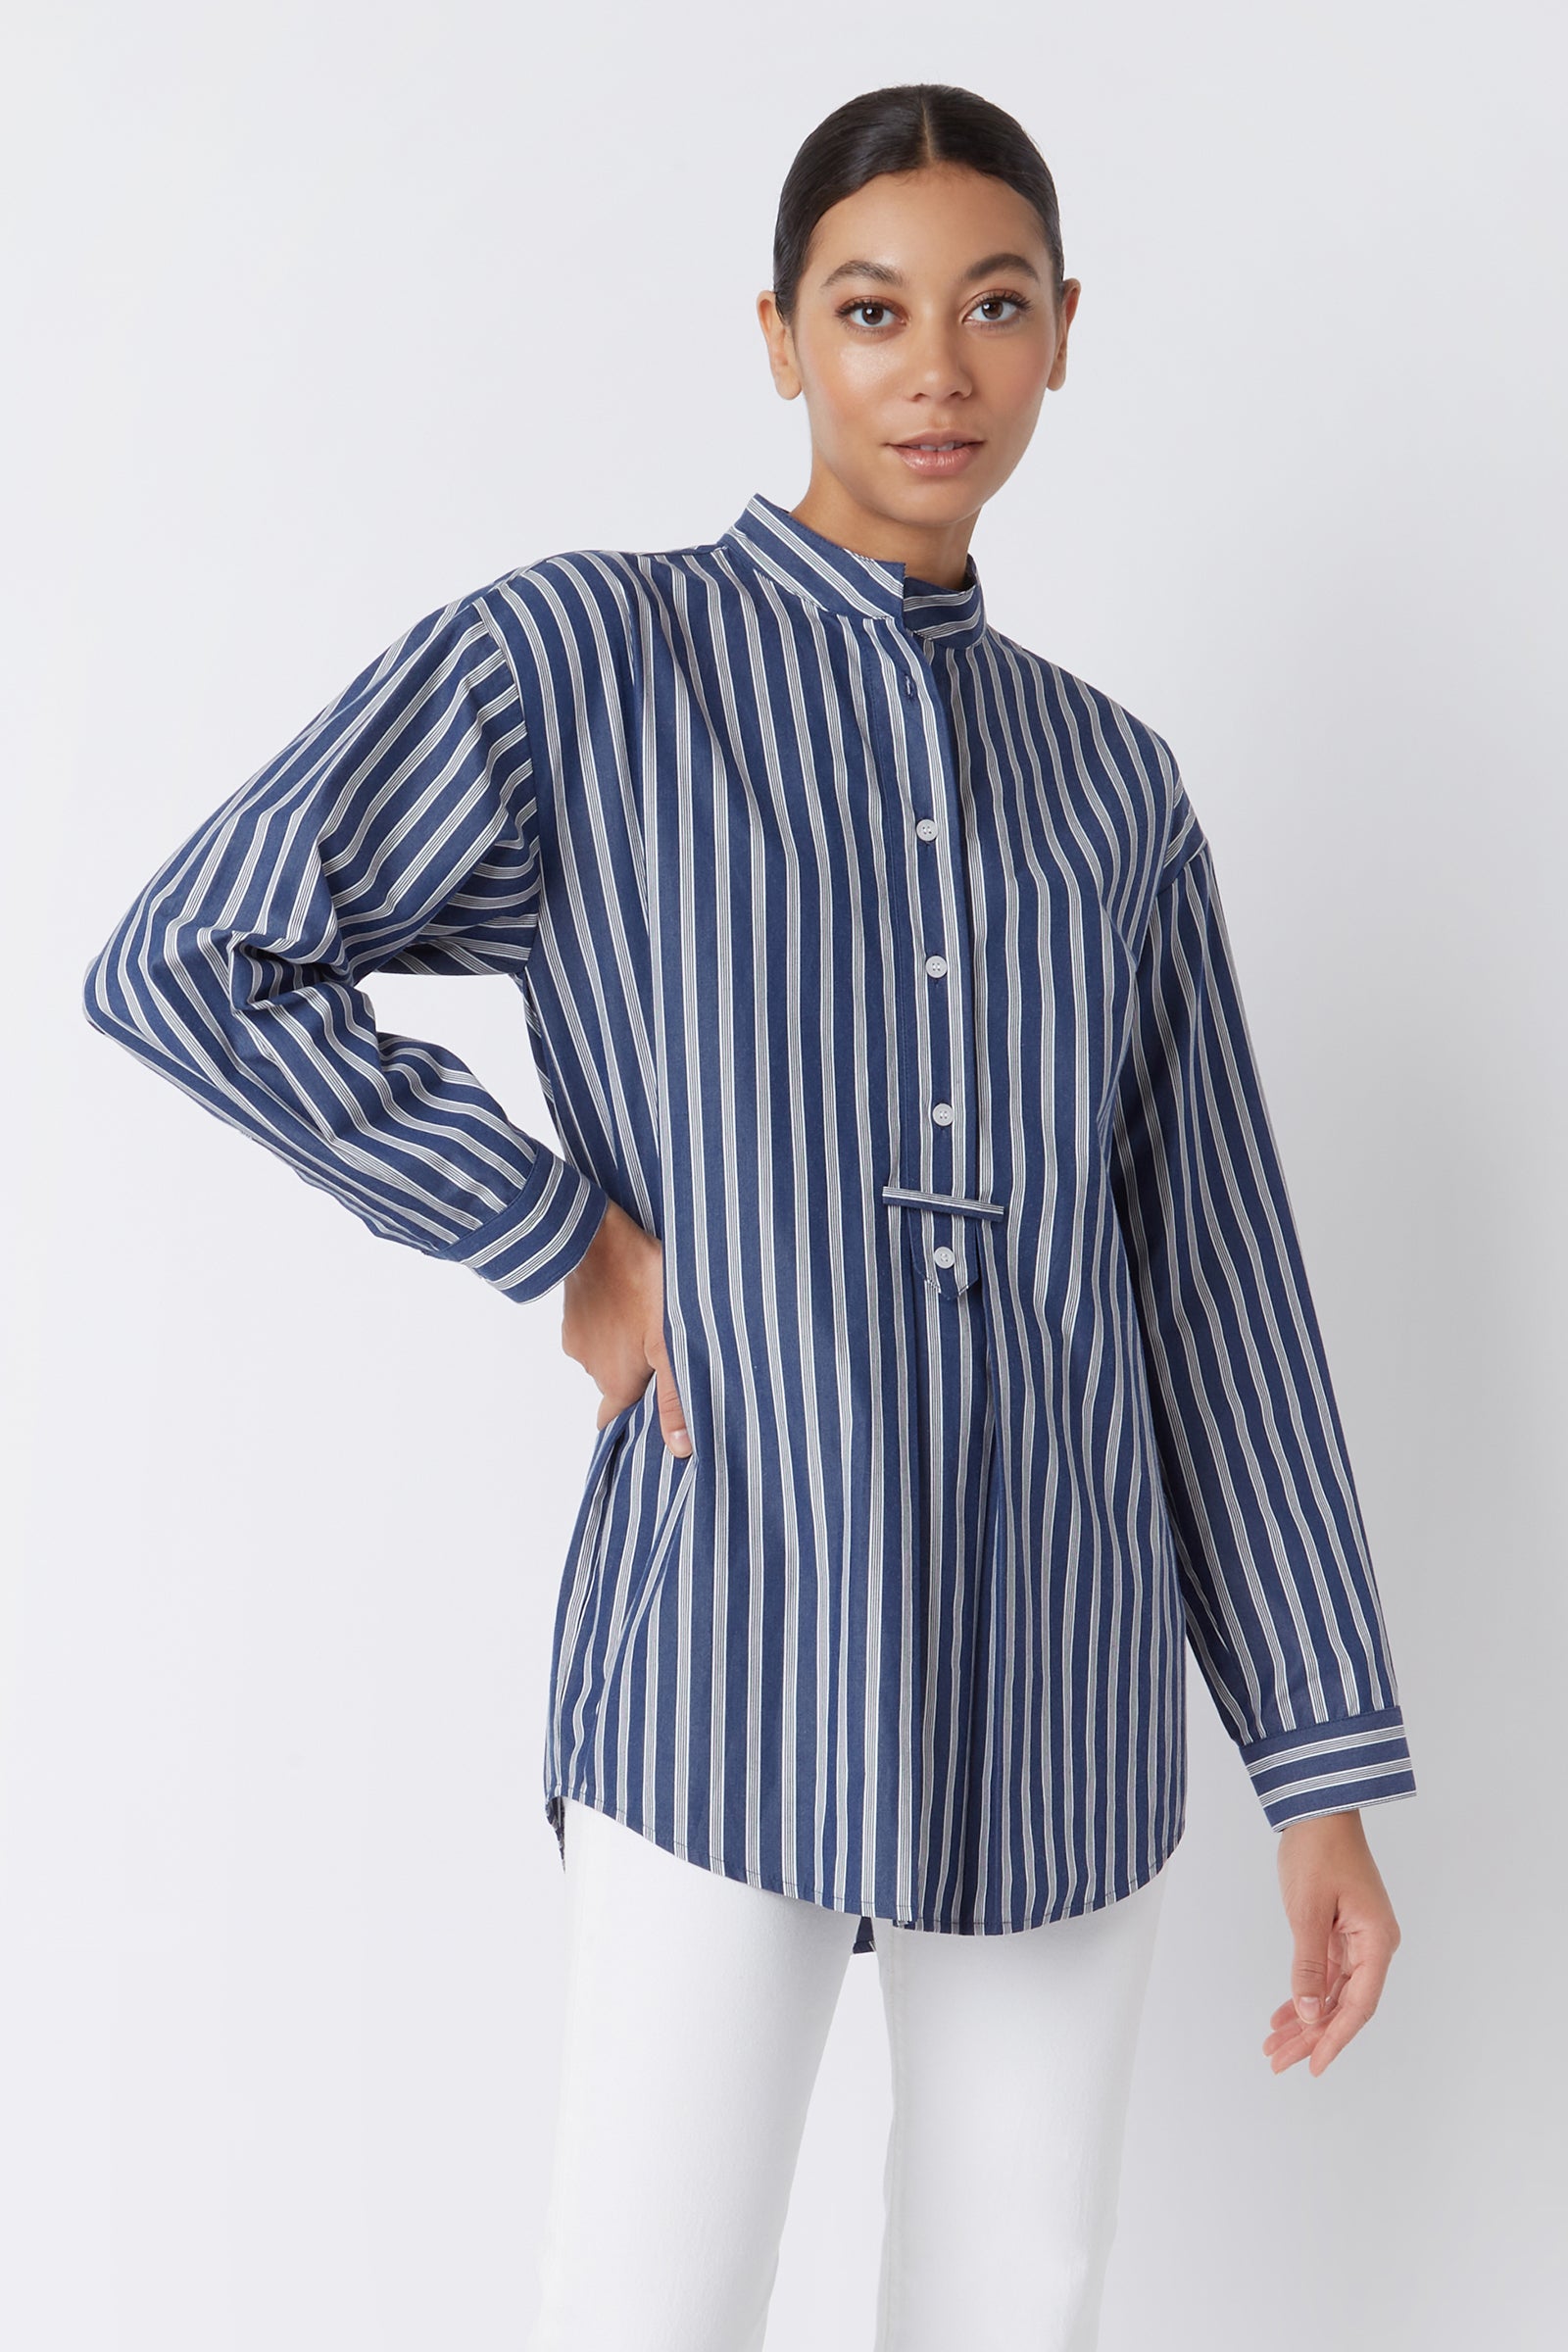 Kal Rieman Georgia Drop Shoulder Tunic in Navy with White Stripe on Model with Hand on Hip Croped Front View